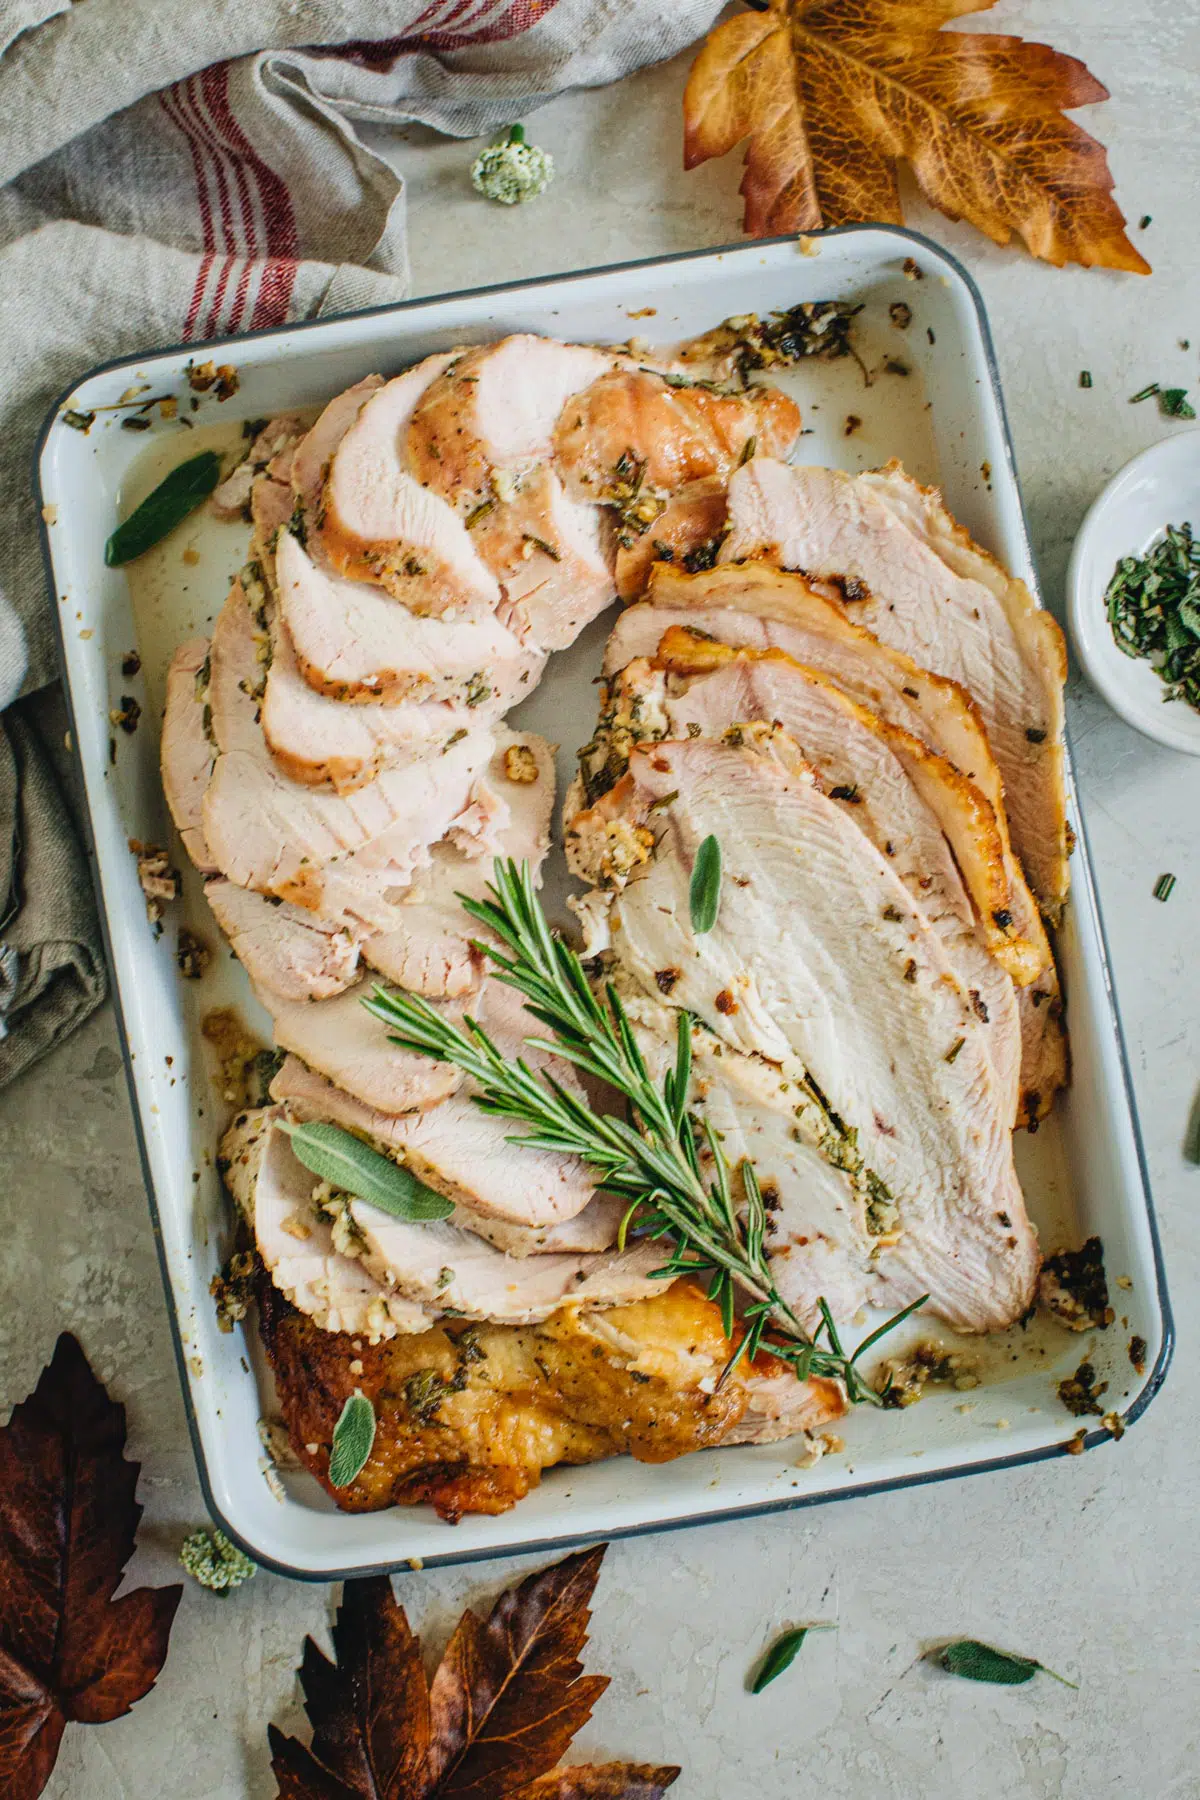 Oven-roasted turkey breast on a rimmed baking sheet.